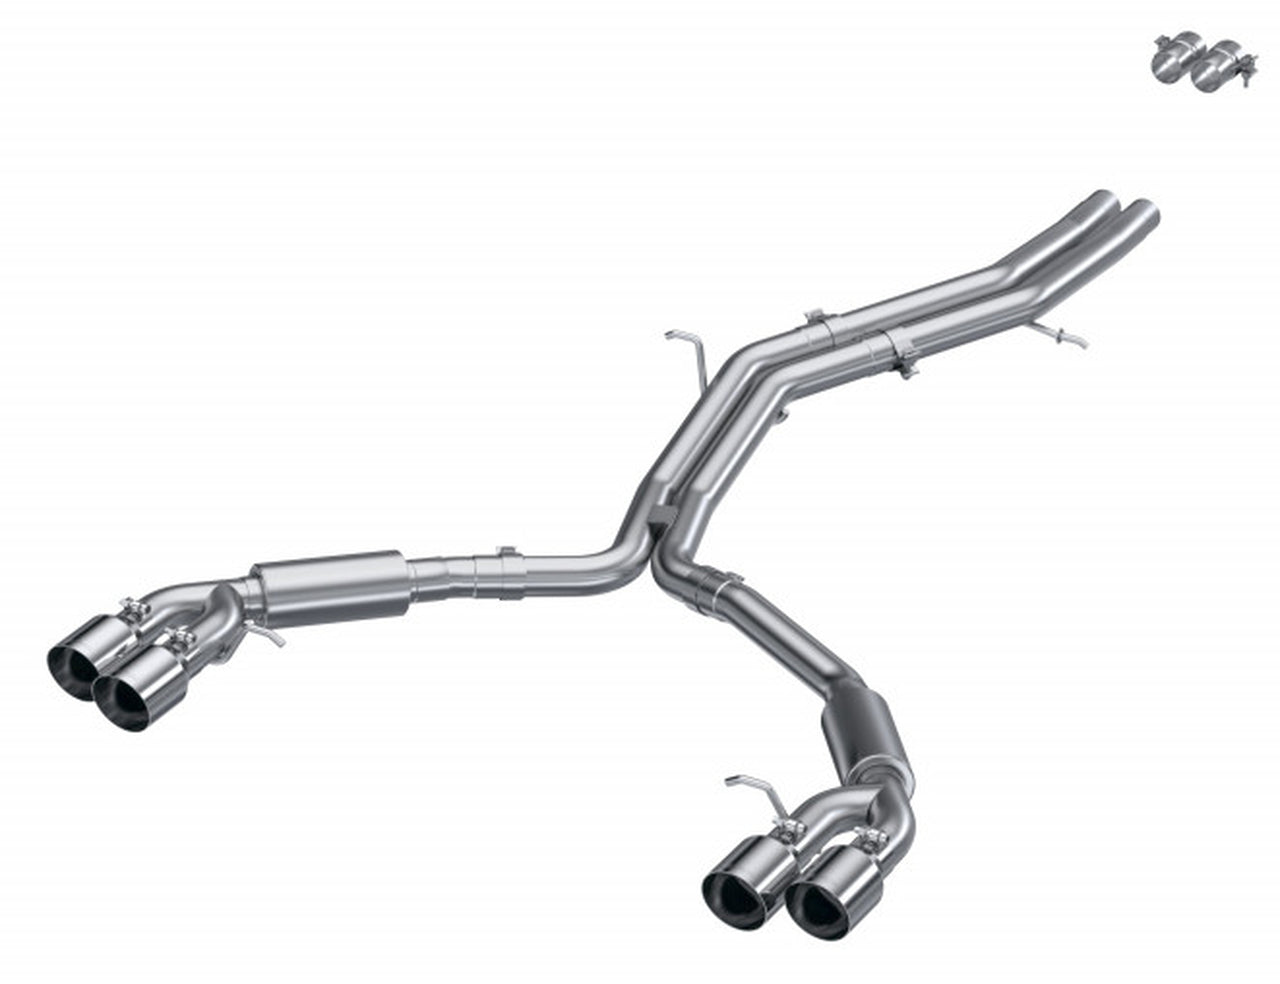 MBRP 2.5" T304 Stainless Steel Resonator Back Exhaust With Quad Split Rear - Audi S4 Sedan and S5 Coupe 3.0 2018-2022